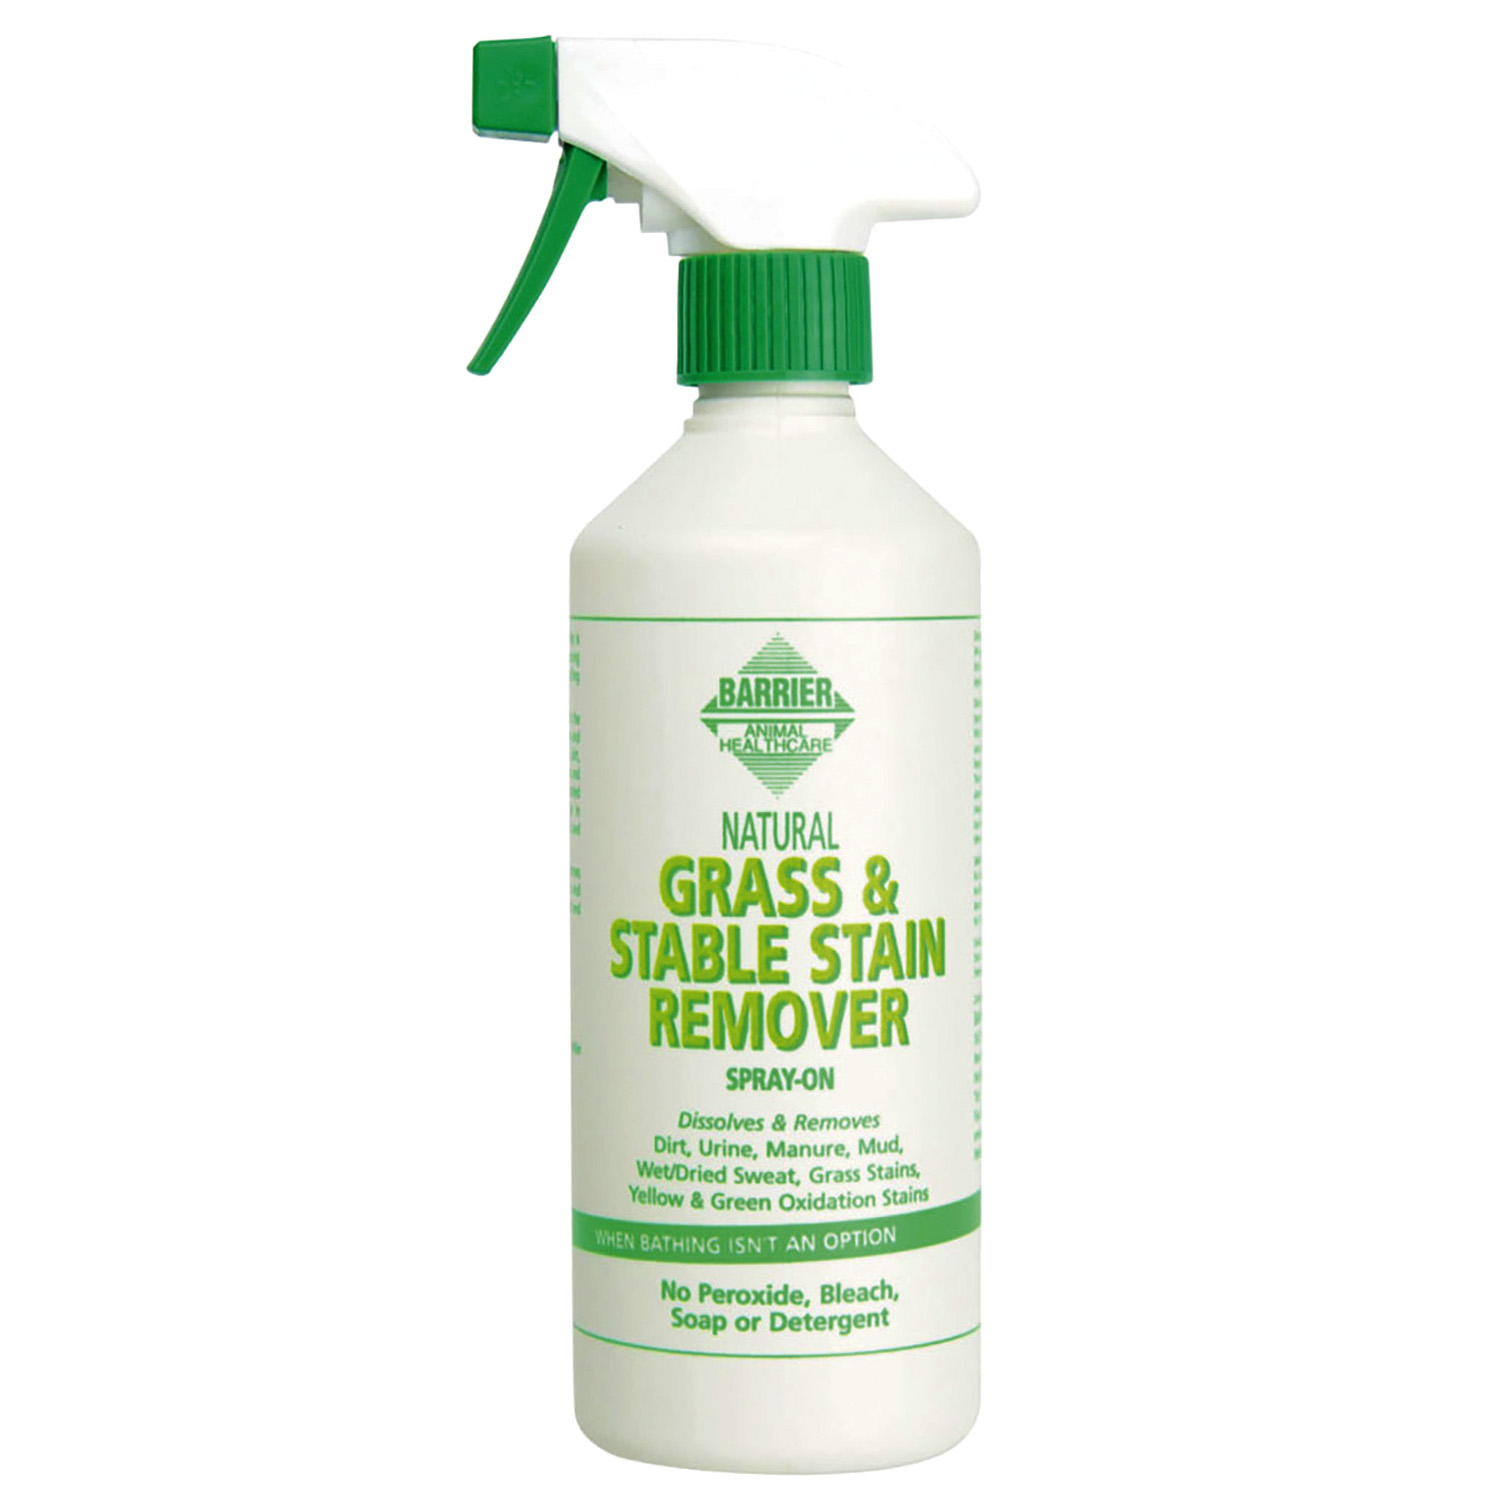 BARRIER GRASS & STABLE STAIN REMOVER BARRIER GRASS & STABLE STAIN REMOVER 400 ML  400 ML